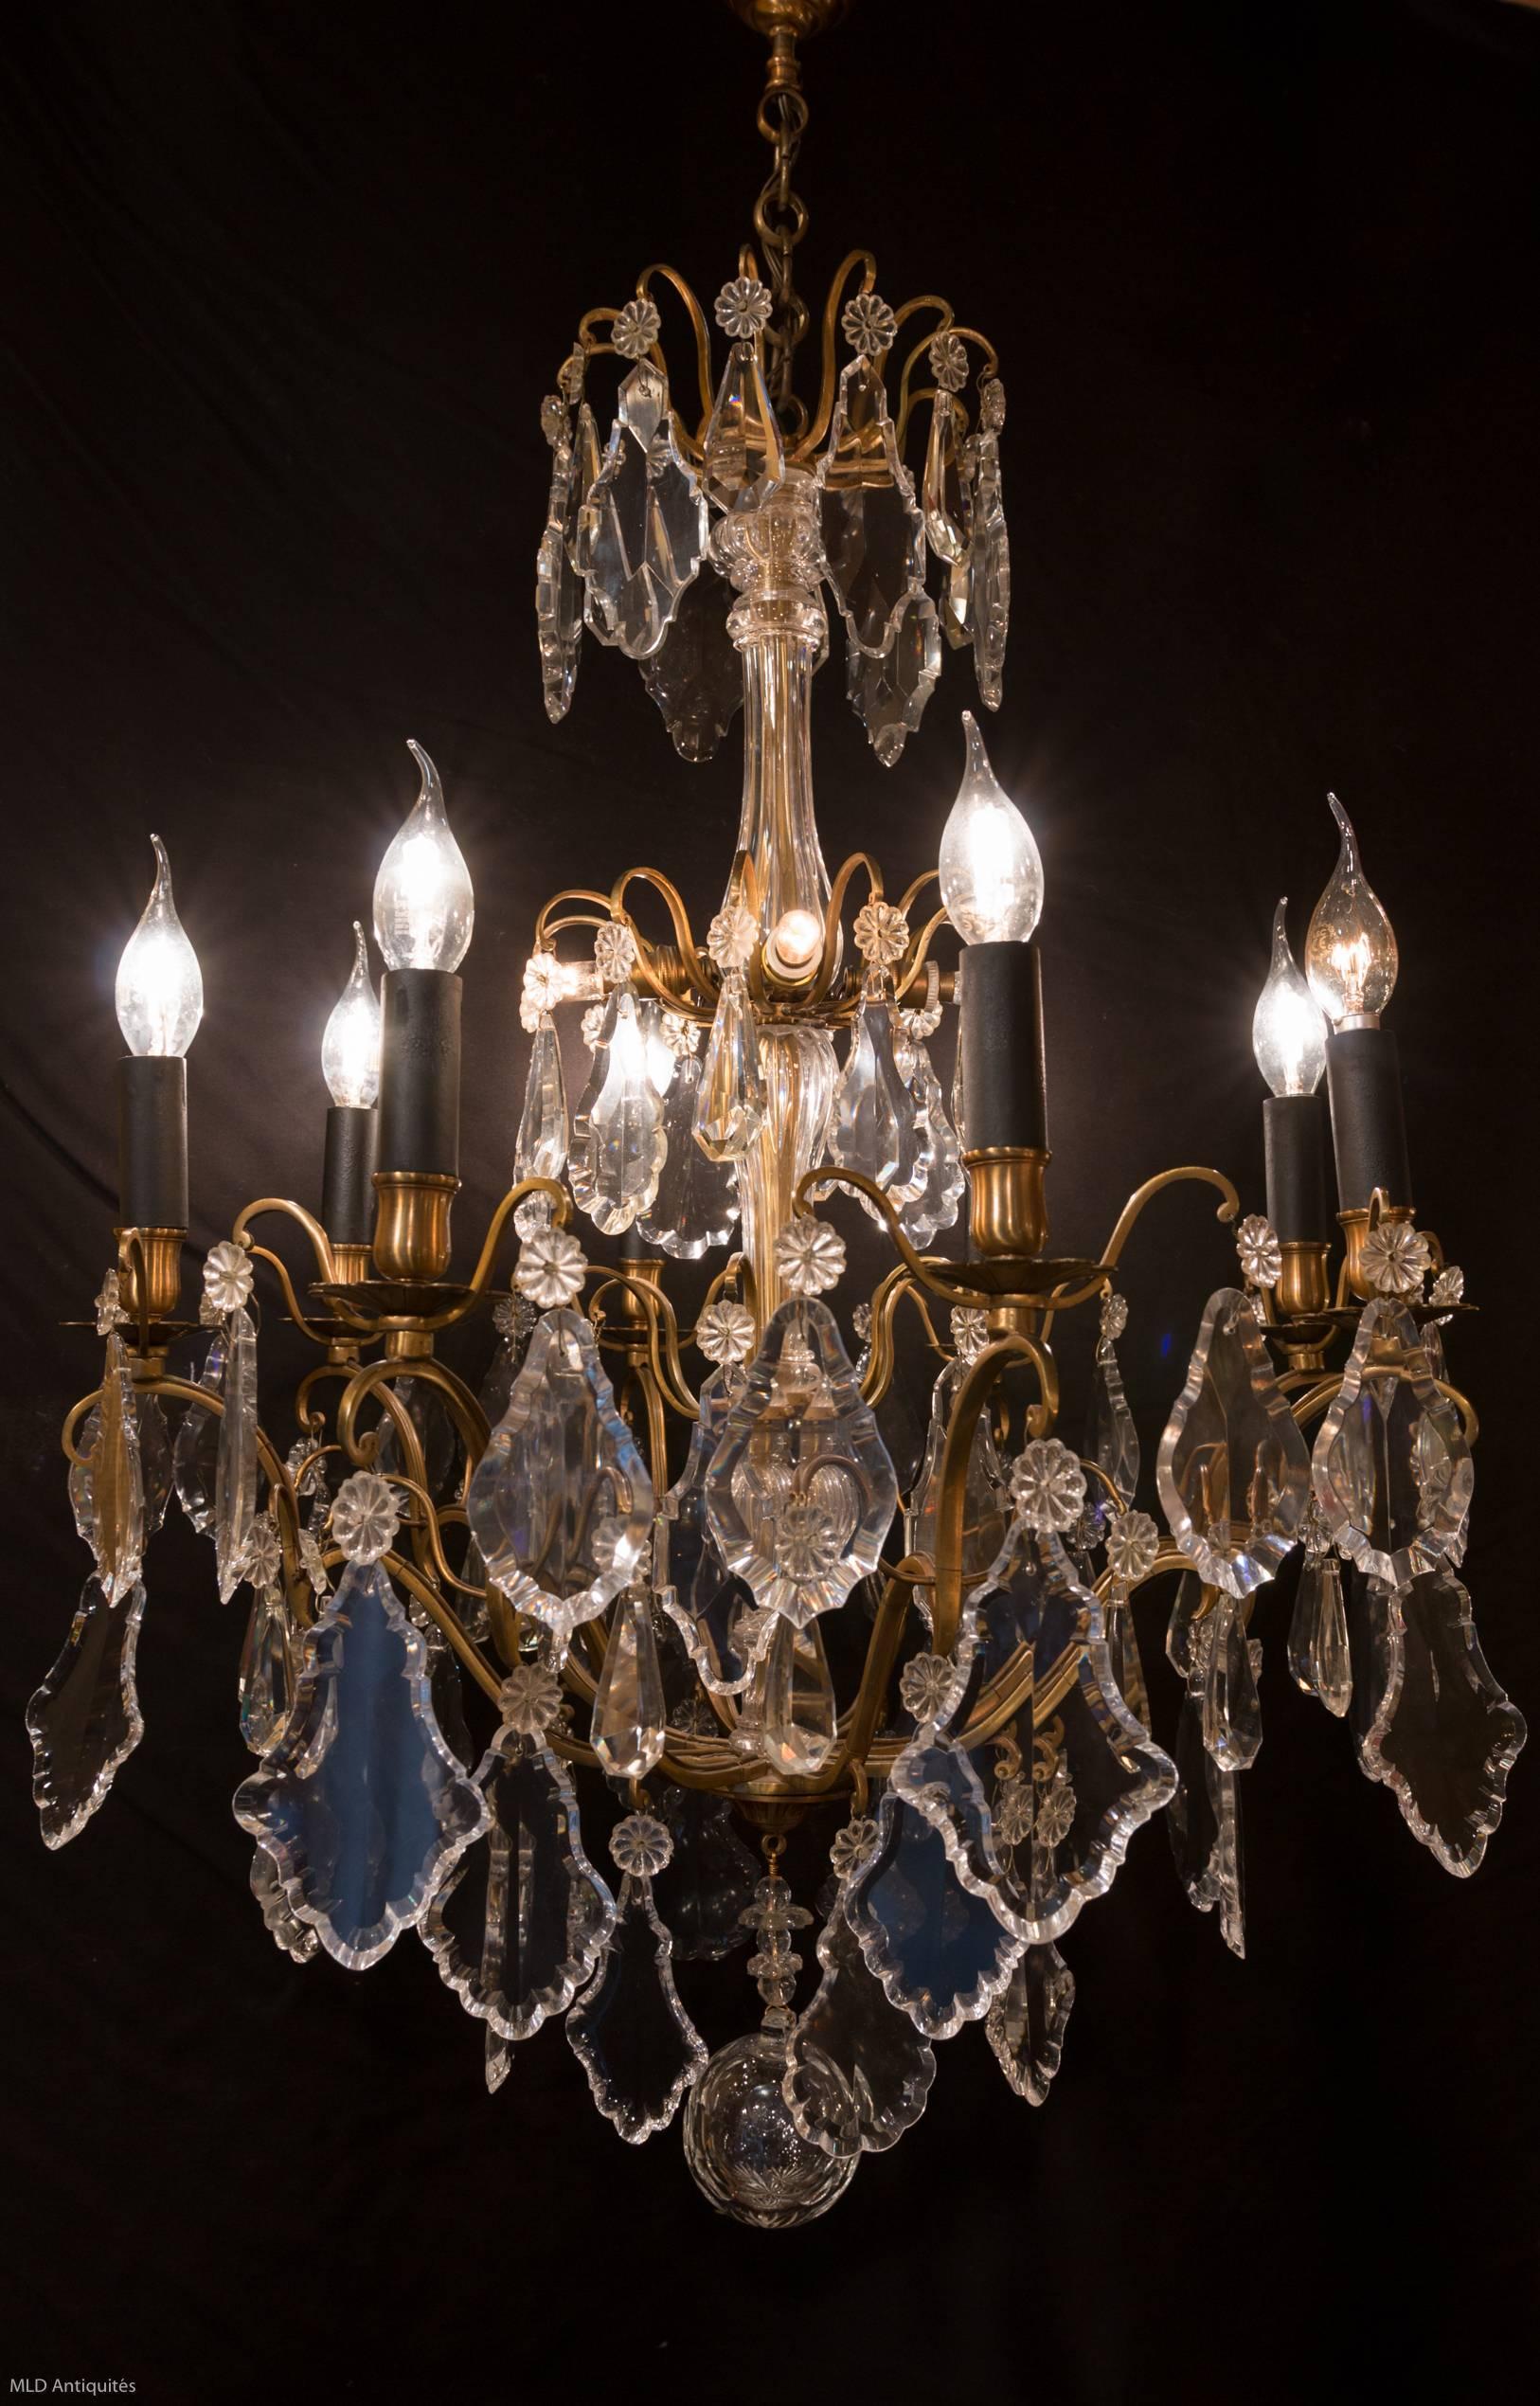 Gorgeous, original gilt bronze and crystal, form cage chandelier in the classical Louis XV style. The chandelier is composed of height perimeter arm lights and three internal lights. Very fine quality white hand-cut crystal pieces, plaques and a